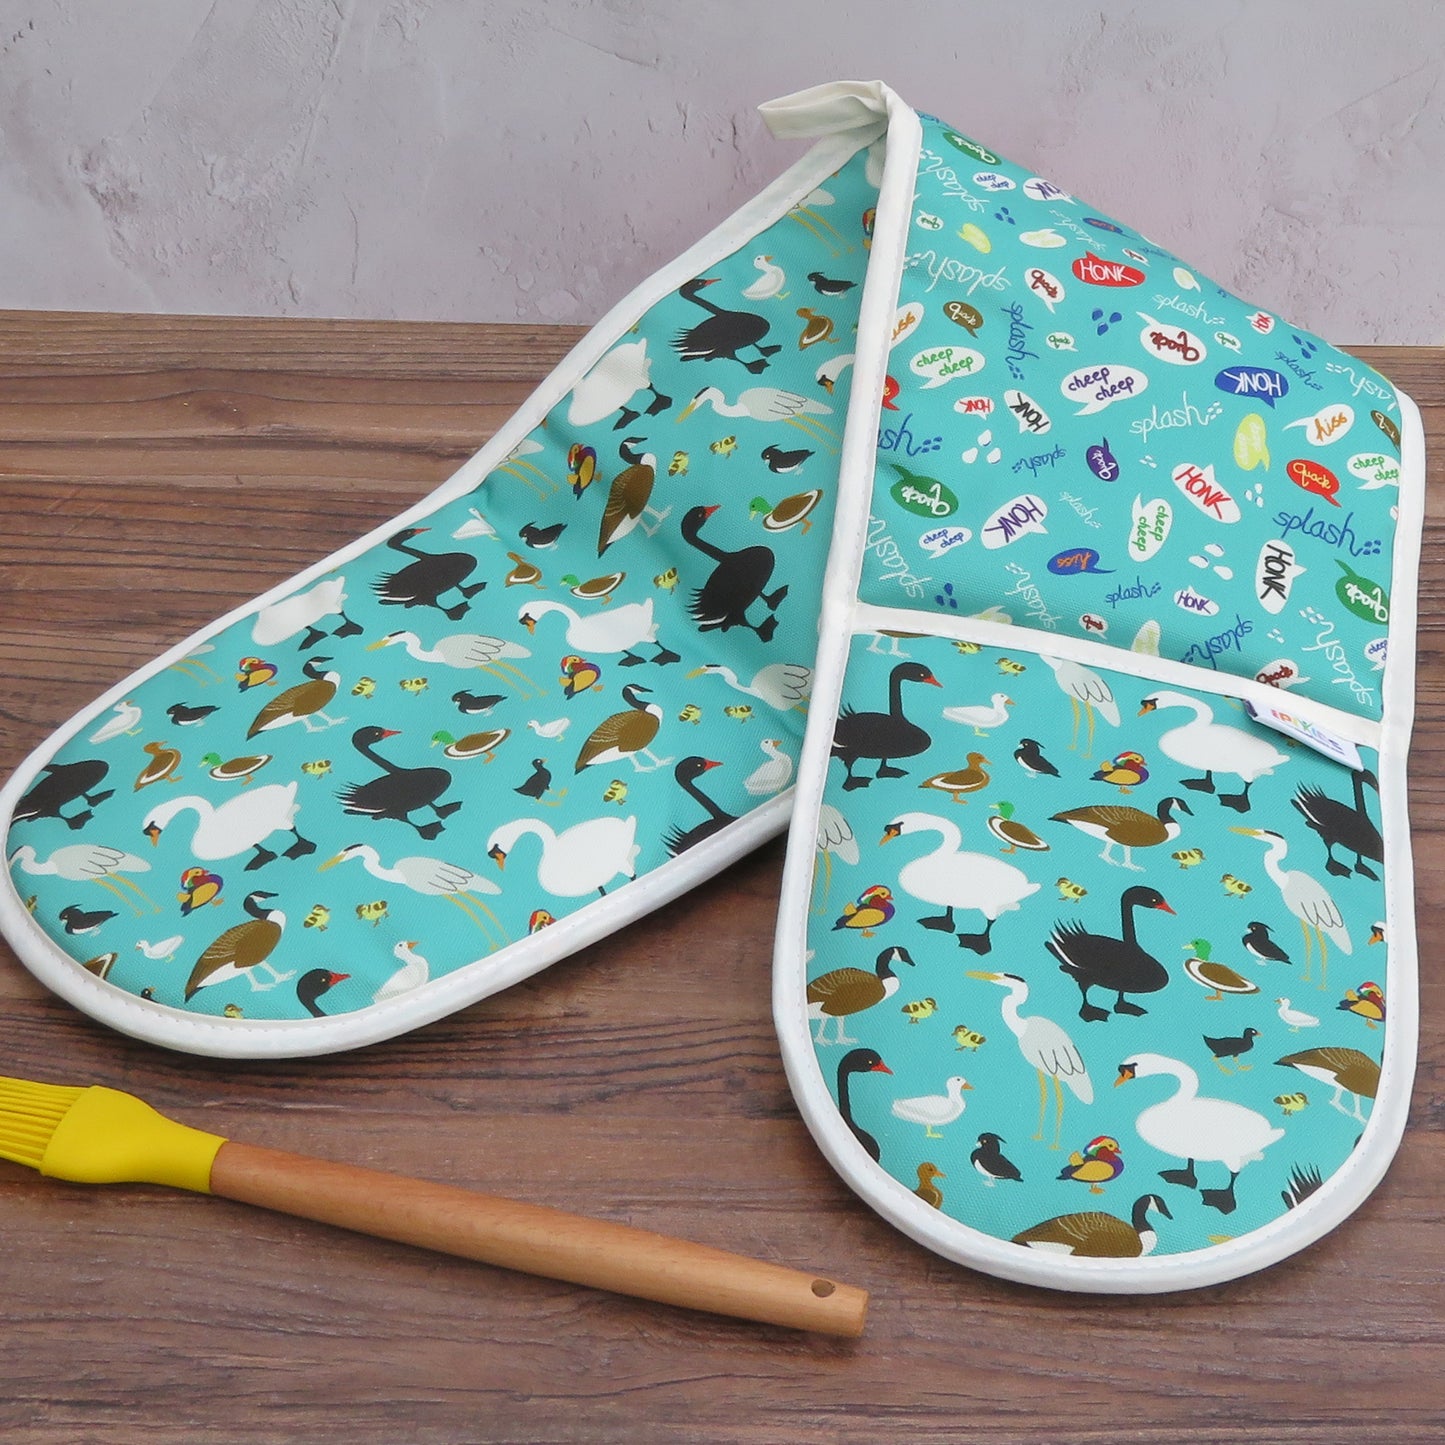 Ducks Oven Gloves in Organic Cotton, designed and made in Britain 